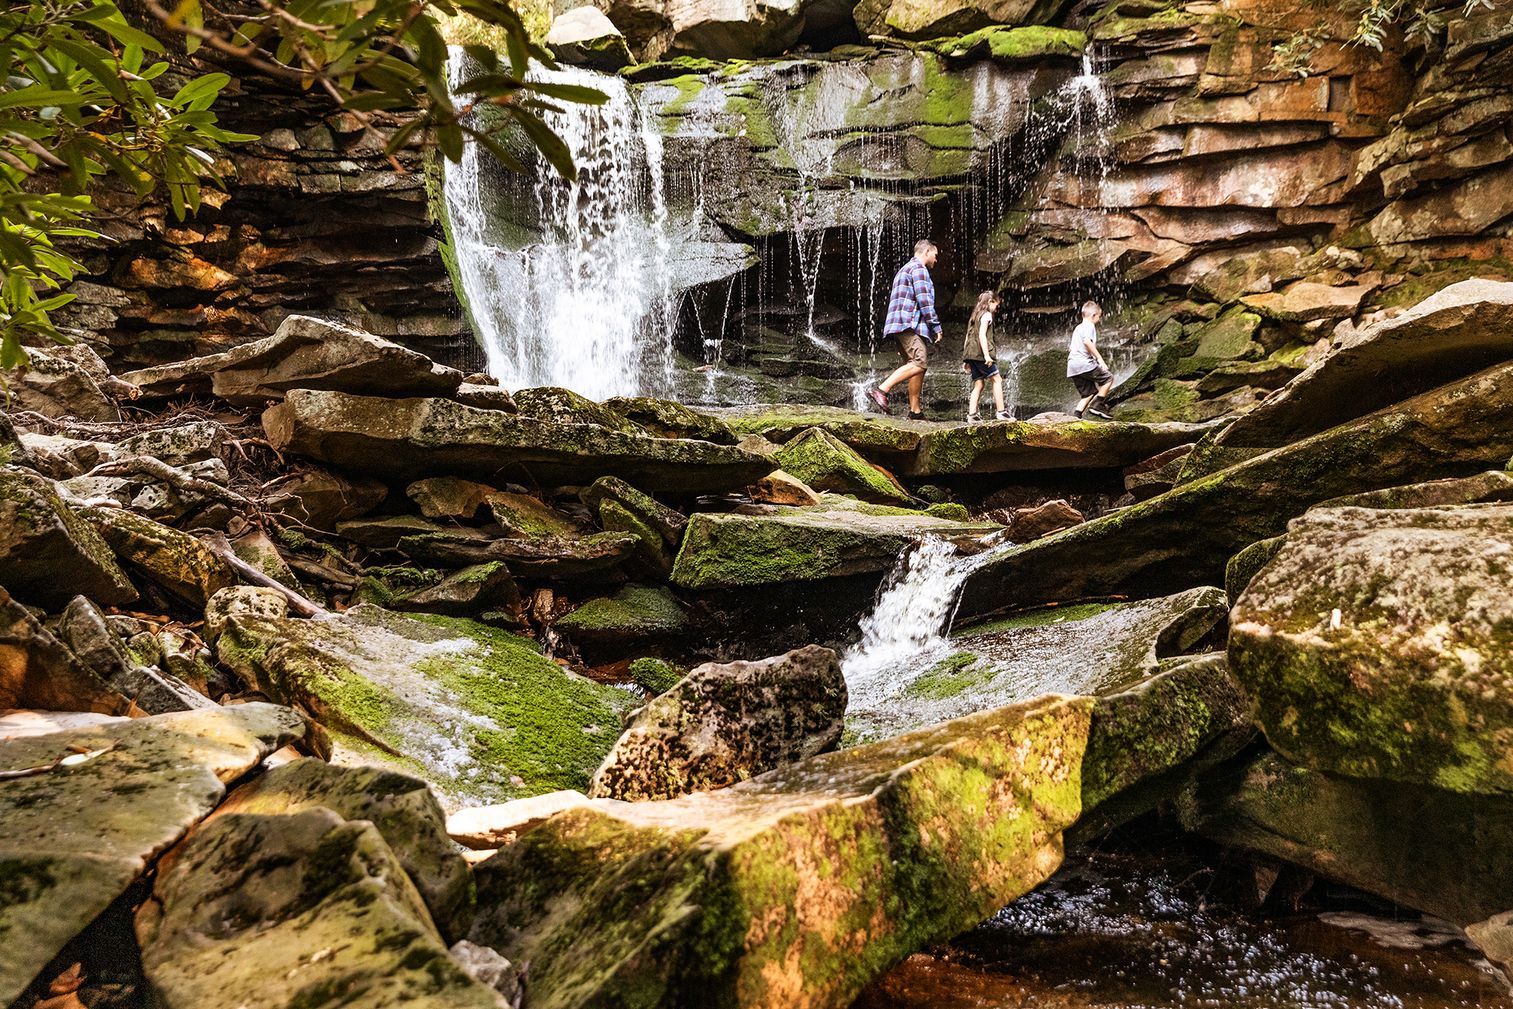 Photo of adult and two kids hiking a trail among rocks with a waterfall in the background at Blackwater Falls.